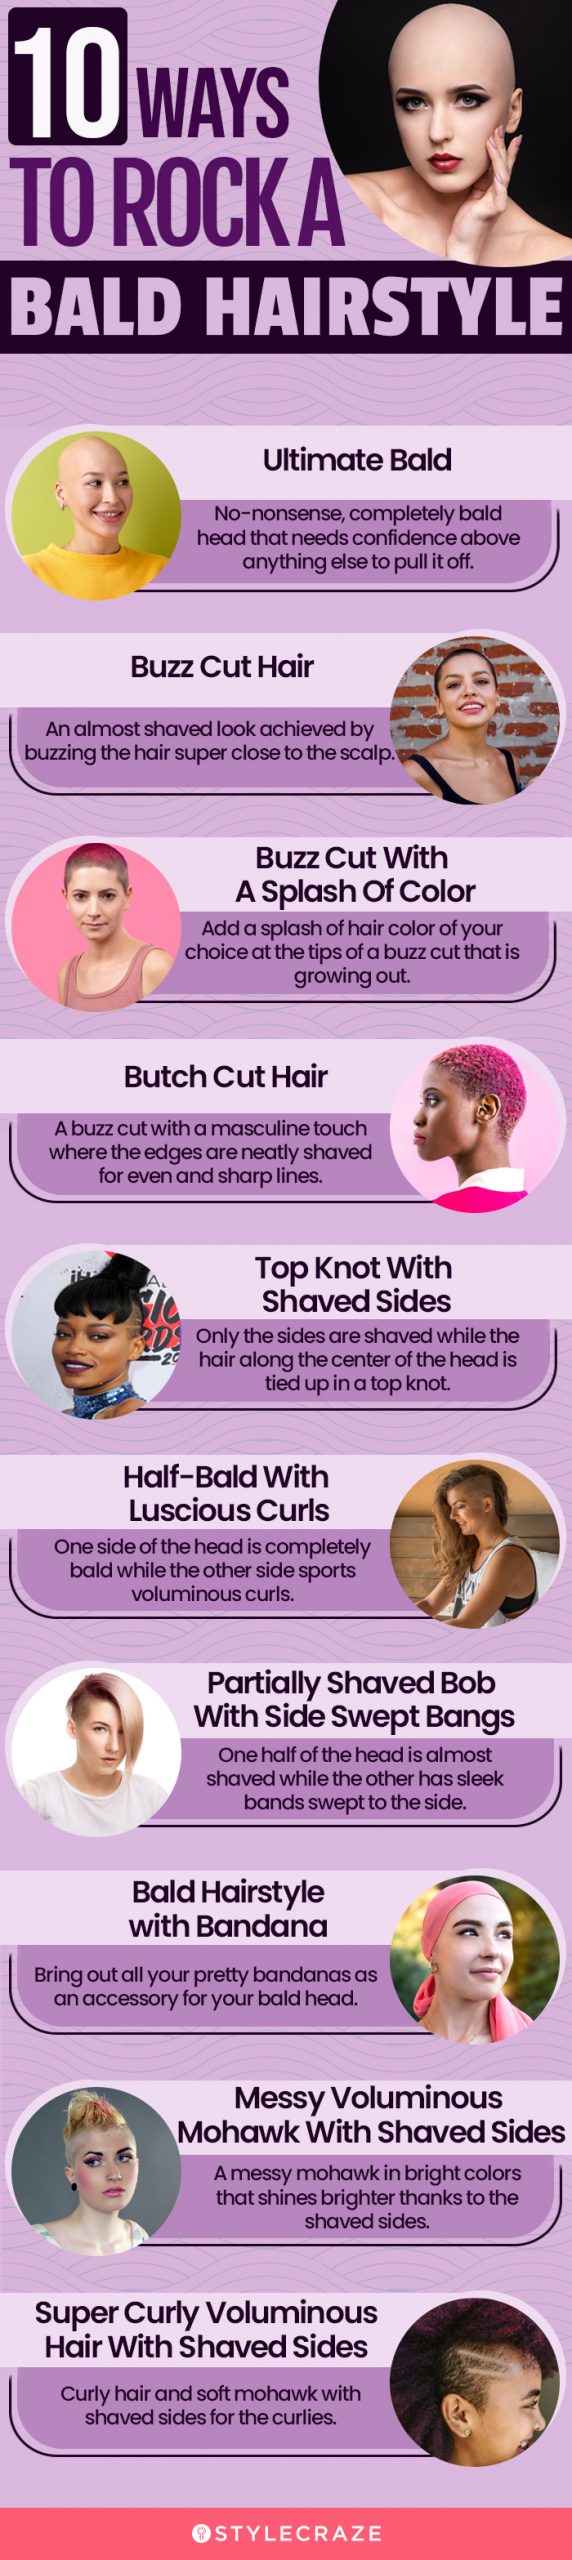 10 ways to rock a bald hairstyle (infographic)